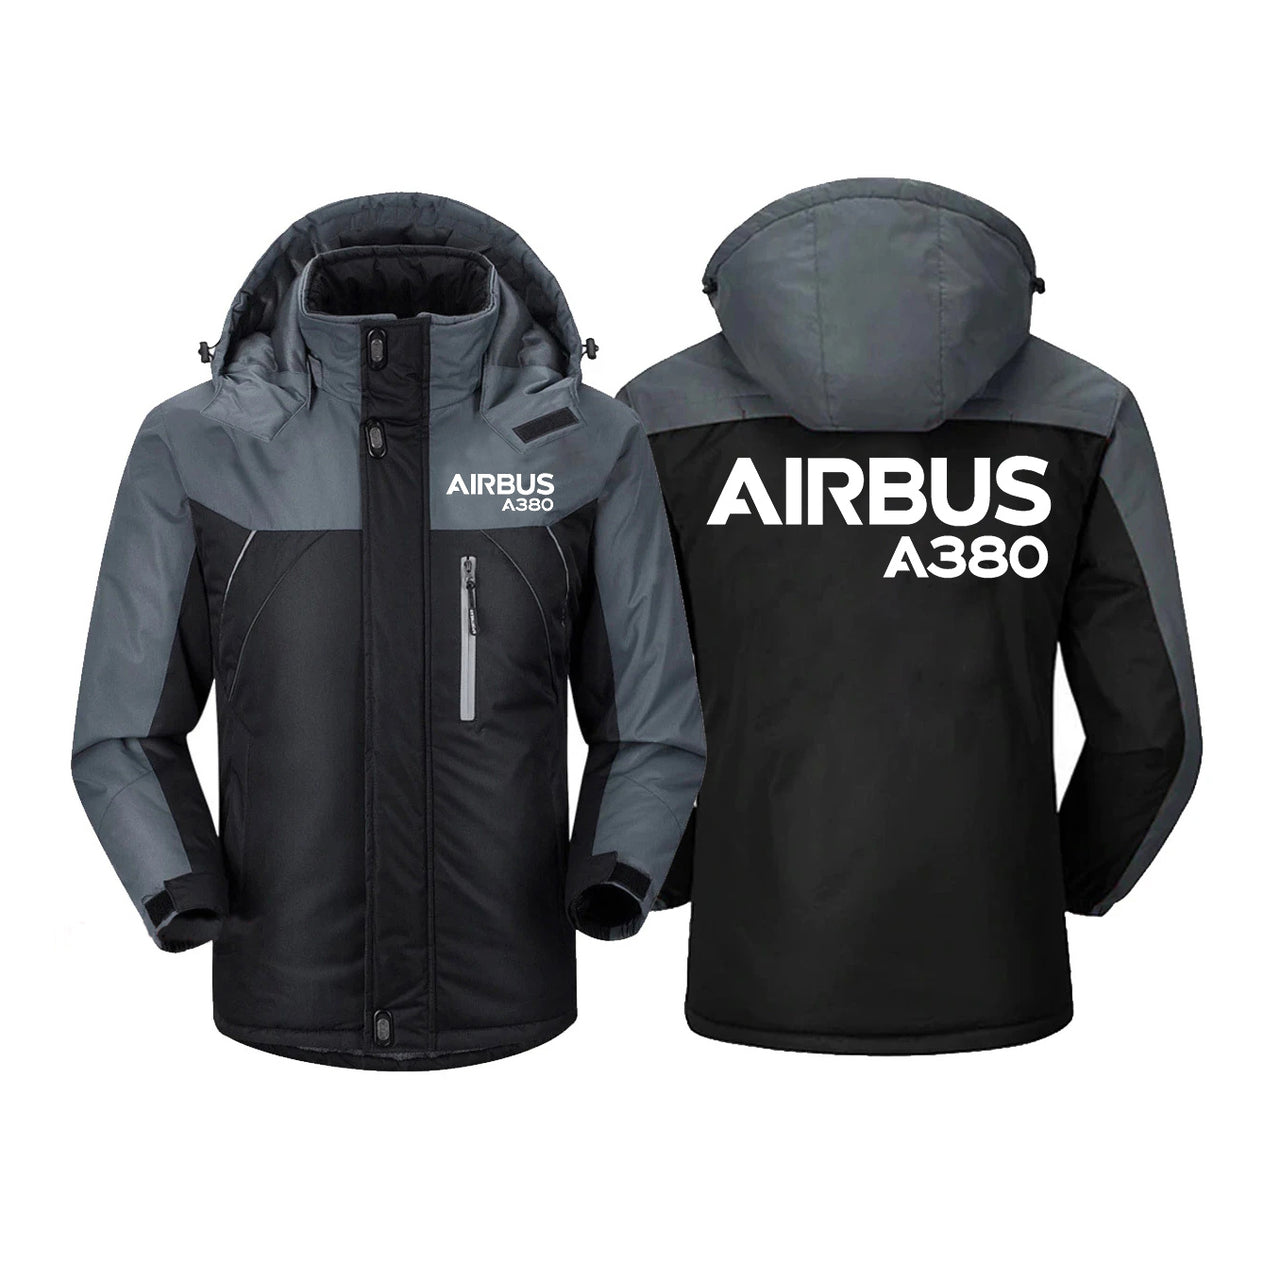 Airbus A380 & Text Designed Thick Winter Jackets